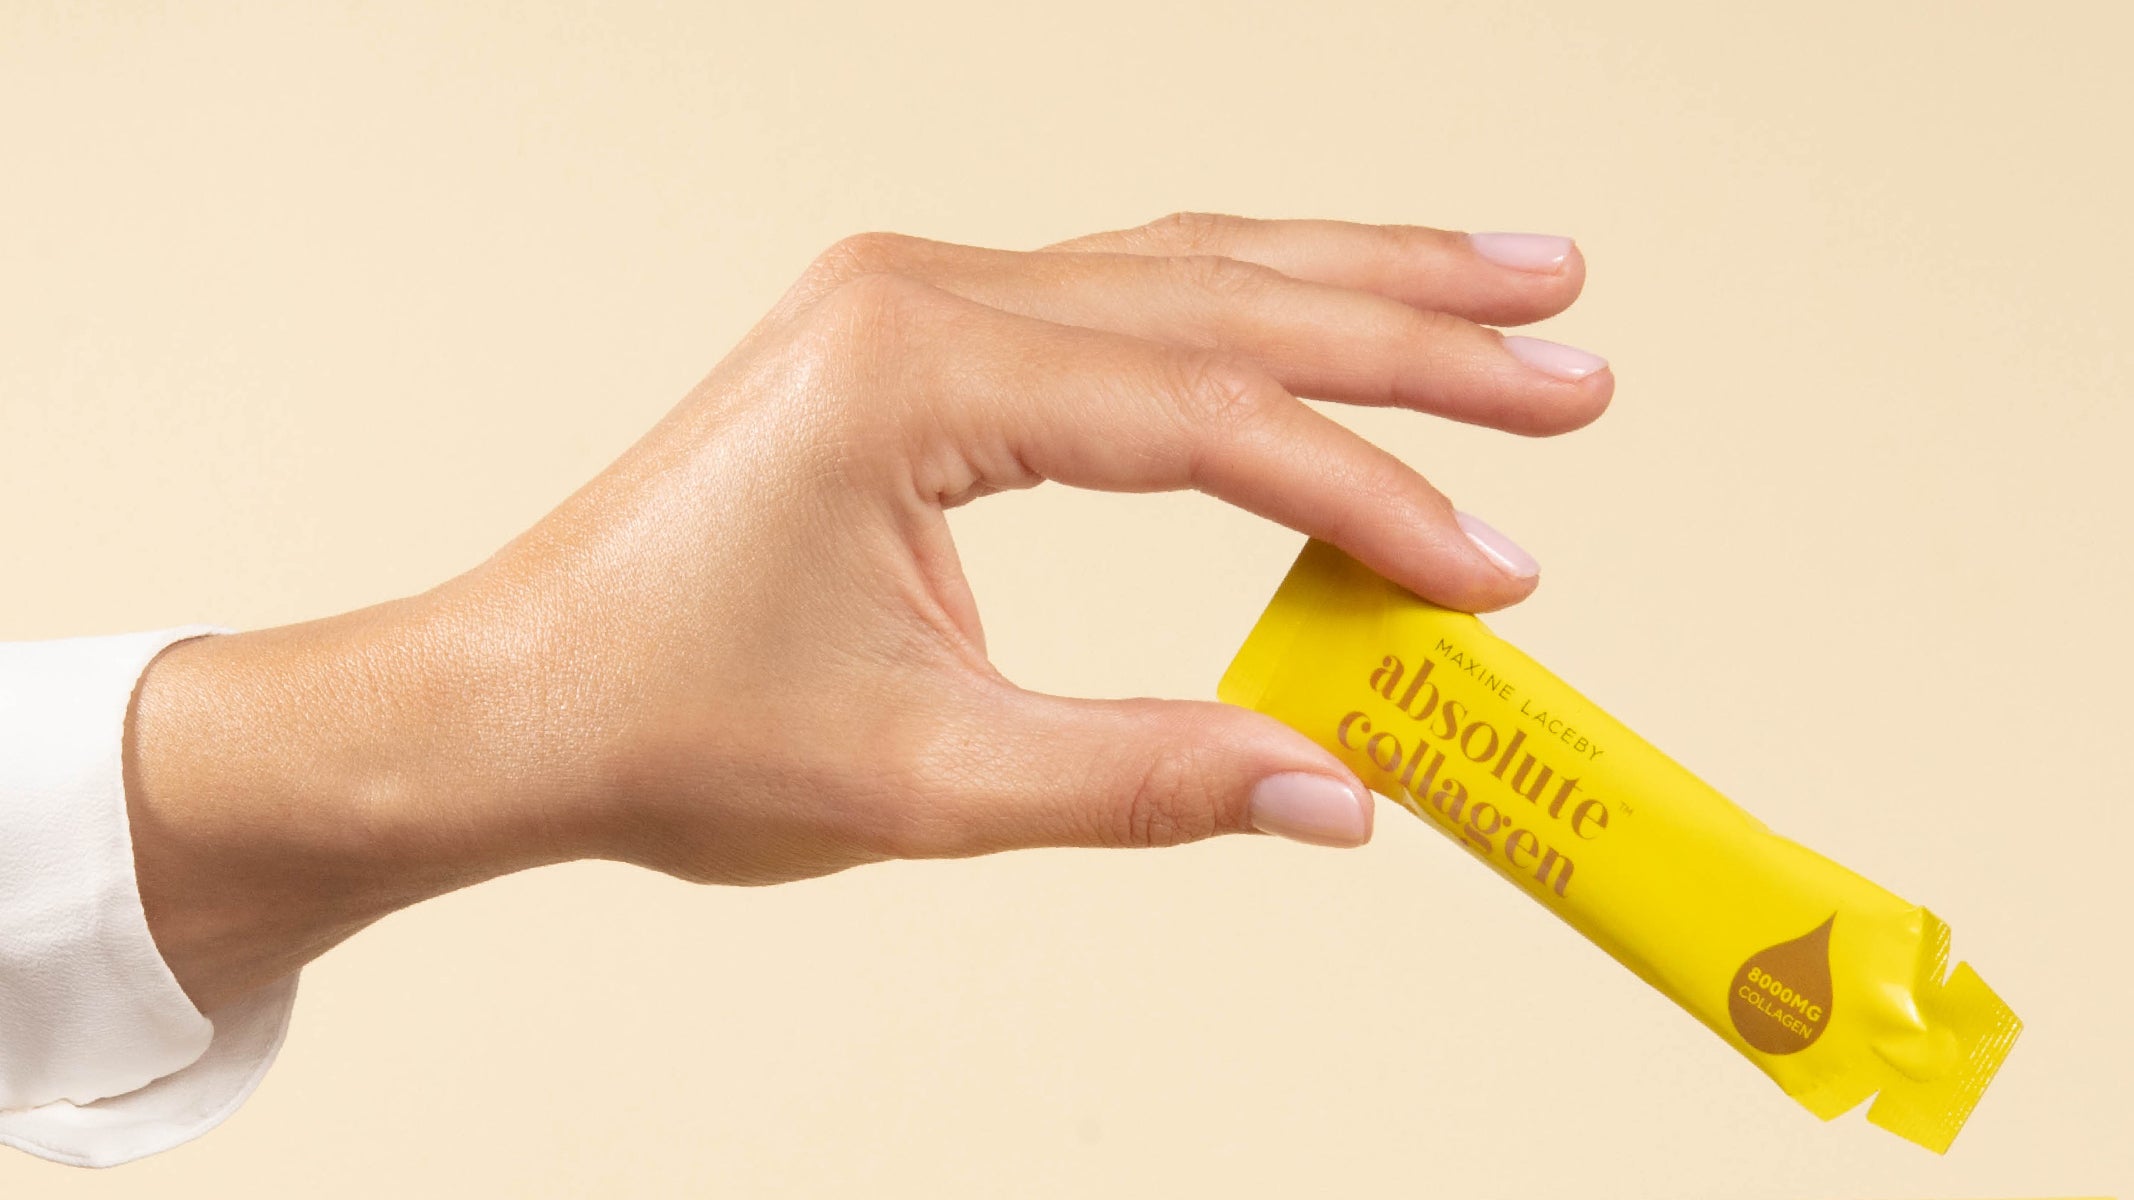 Photo showing a white woman's hand with beautiful fingernails holding up a sachet of Absolute Collagen